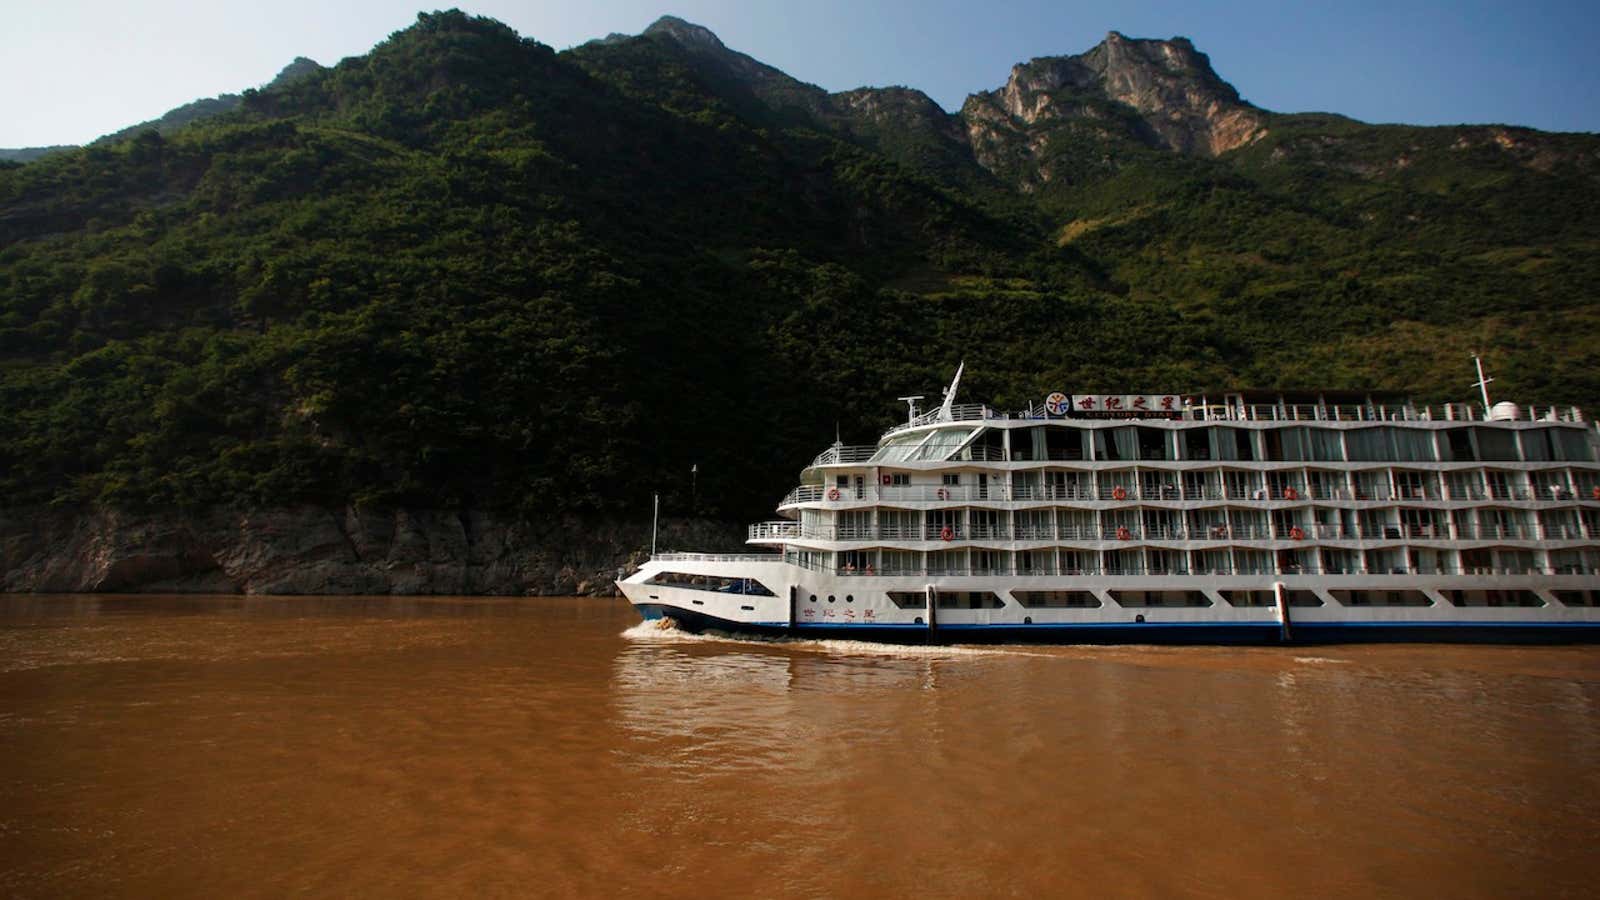 A cruise ship sails on the Yangtze River near the Three Gorges dam in Hubei province.